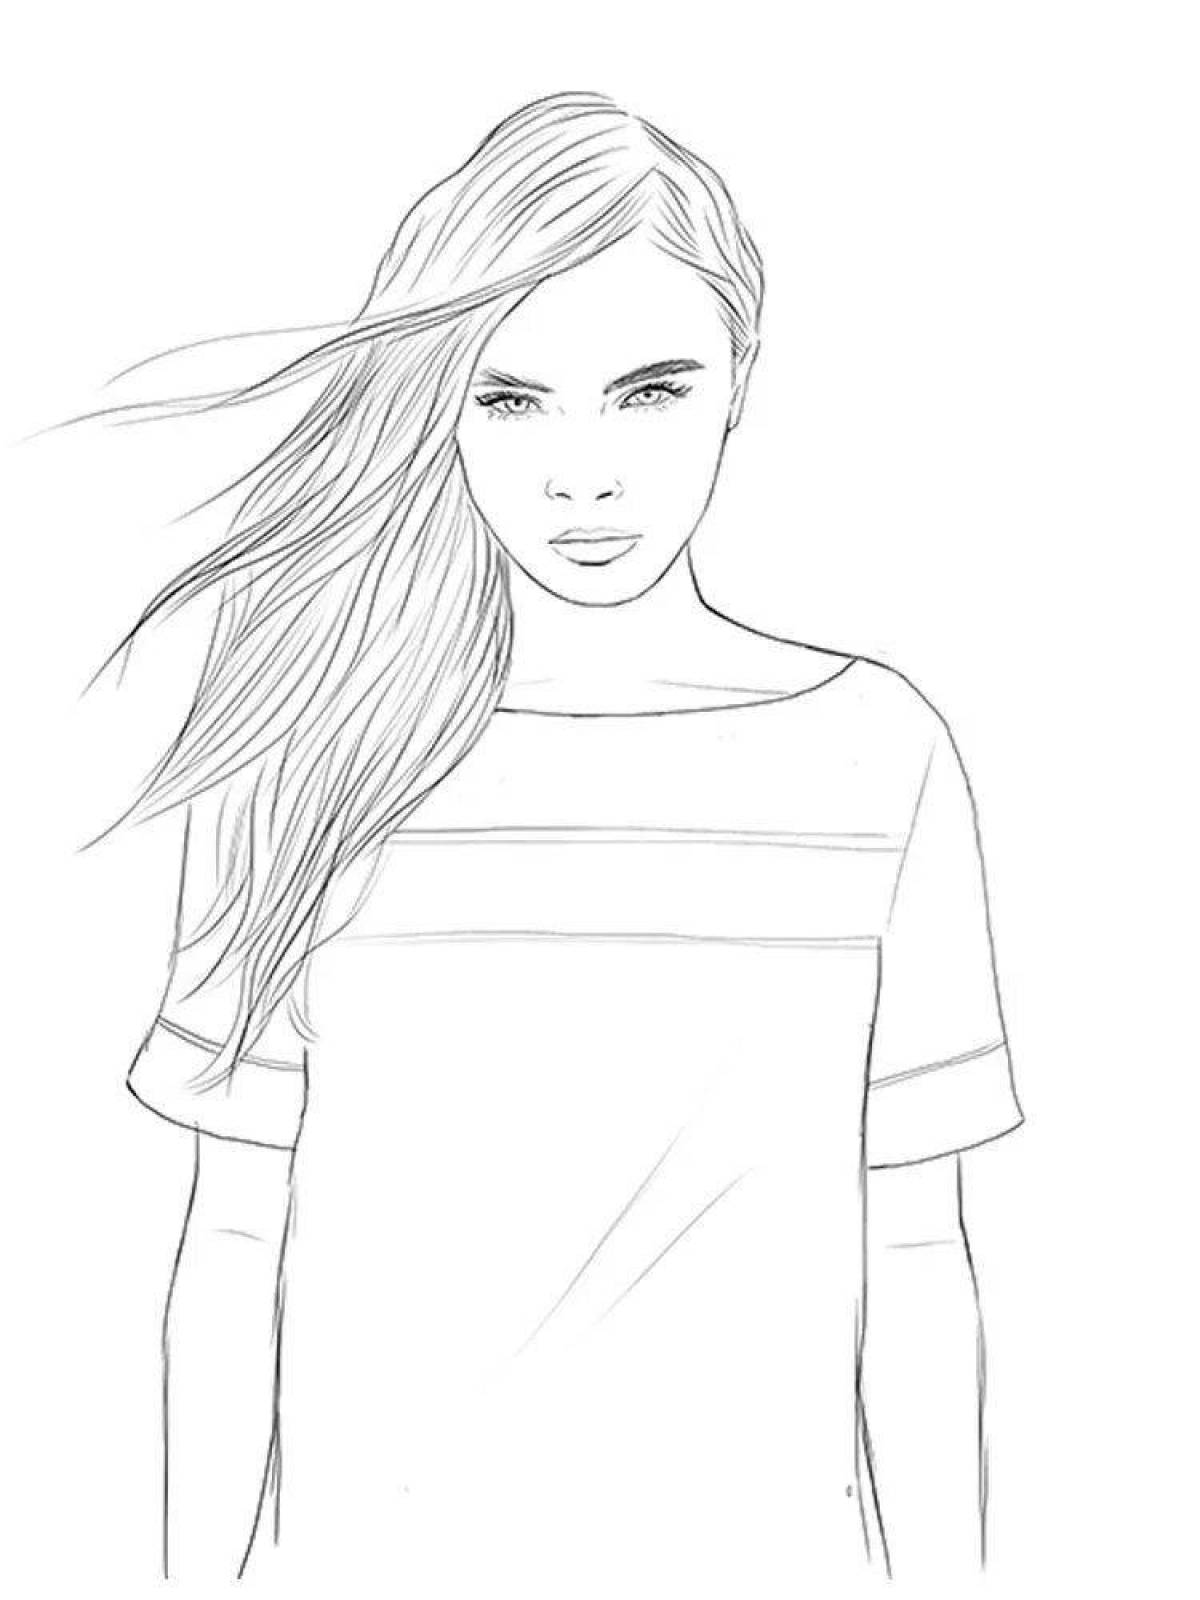 Coloring page of live man and girl